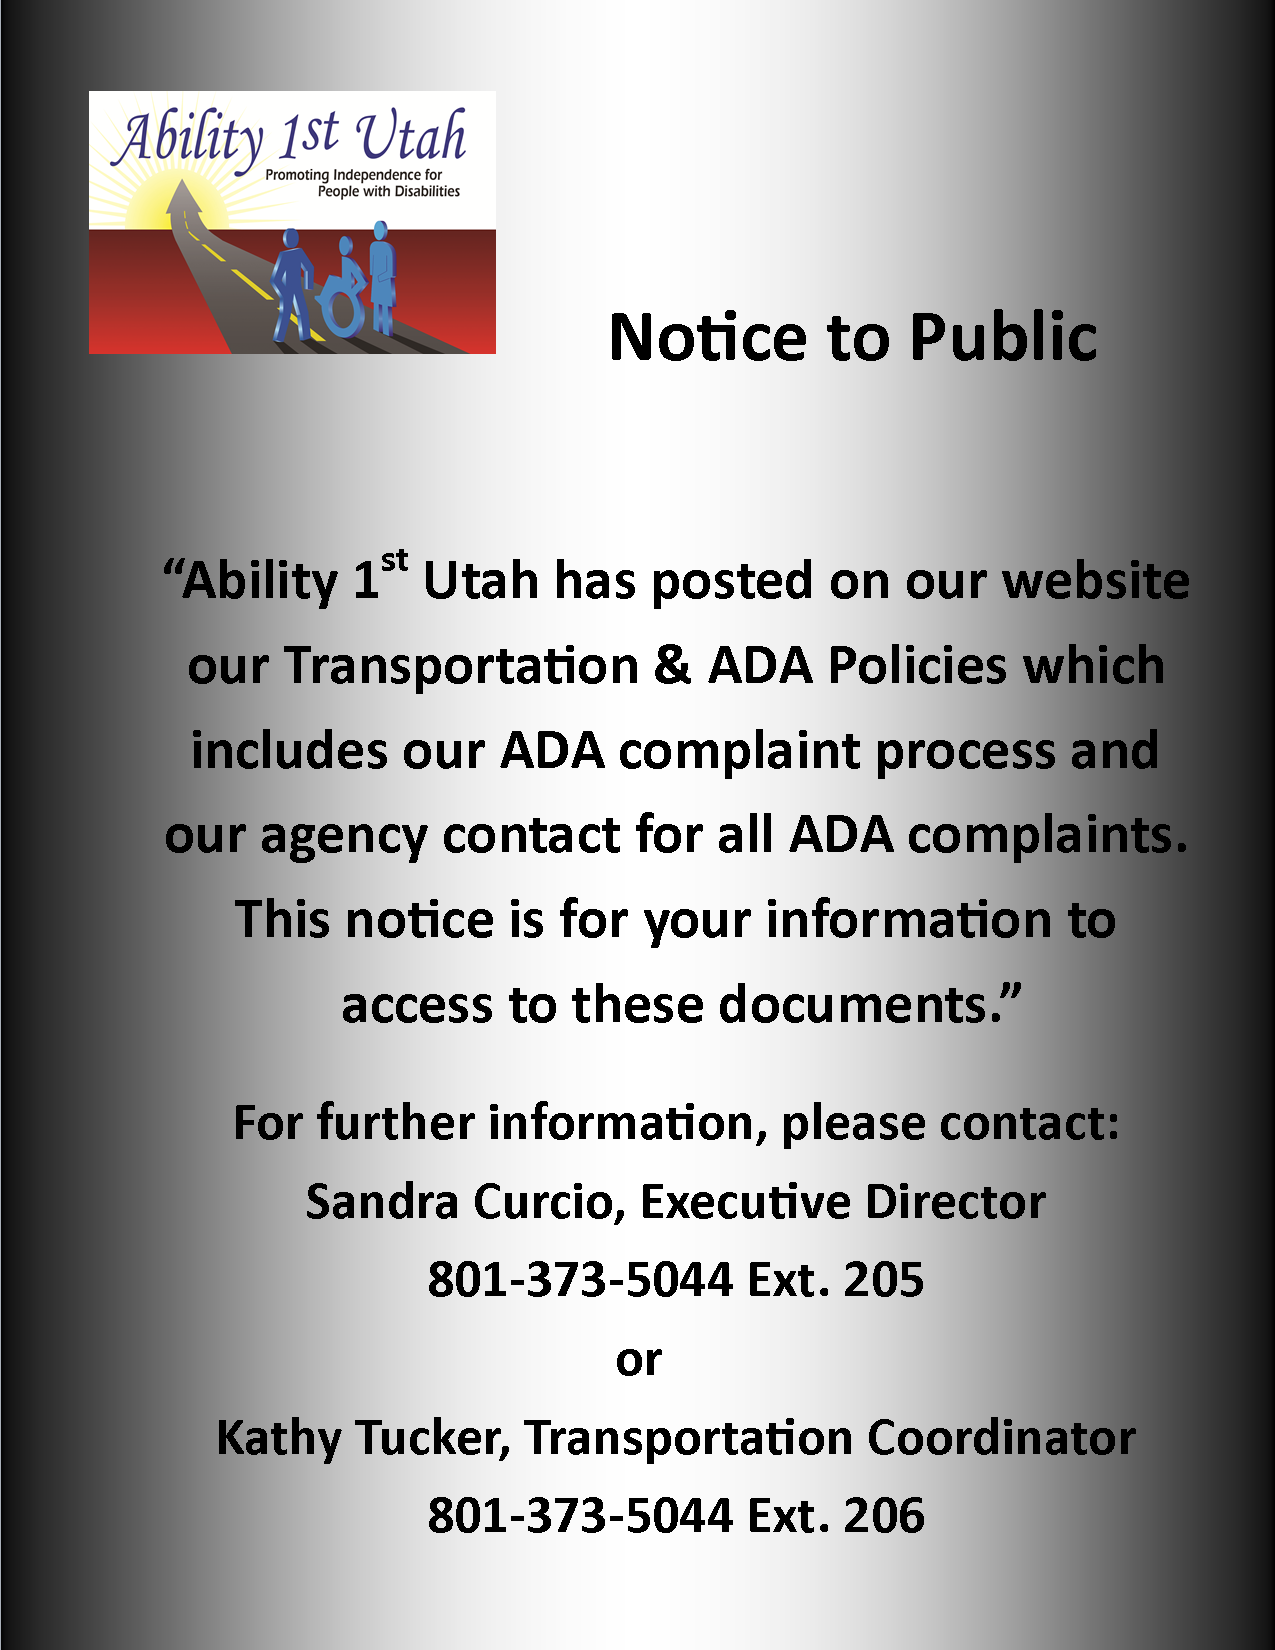 Notice to the public Ability 1st Utah has posted on our website our transportation and ADA policies which includes our ADA complaint process and our agency contact for all the ADA complaints. This notice is for your information to access to this documents. For further information please contact Sandra Curcio Executive Director phone number 801 373 5044 extension 205 or Kathy Tucker Transportation Coordinator phone number 801 373 5044 extension 206